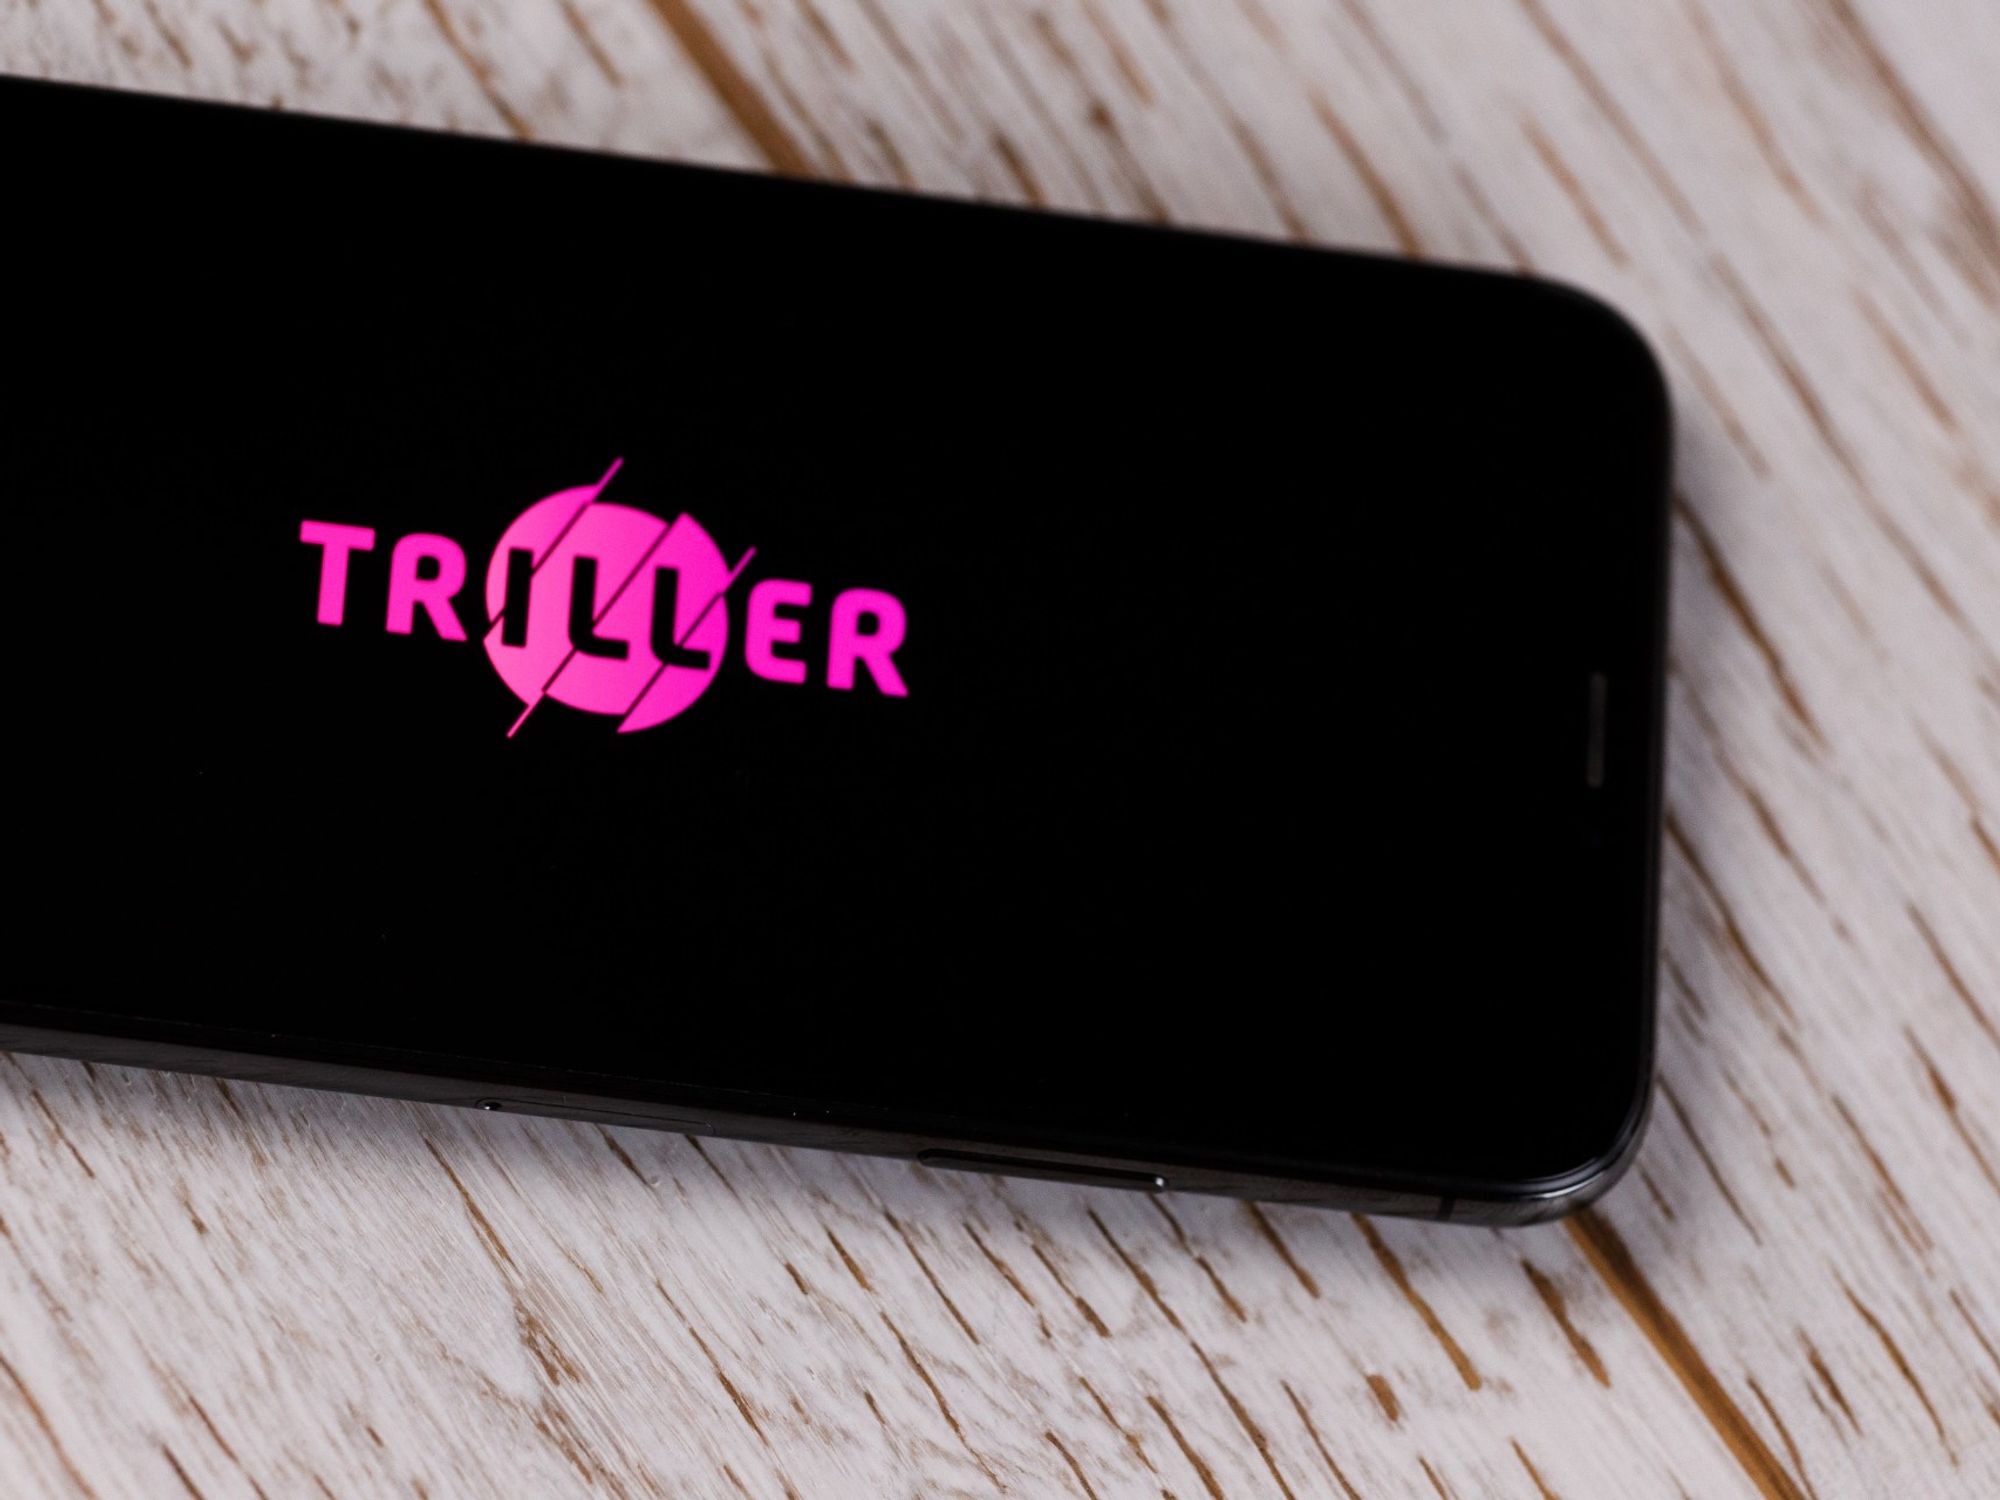 'Nothing but a Baseless Shakedown': Triller's CEO on Music Infringement Claims